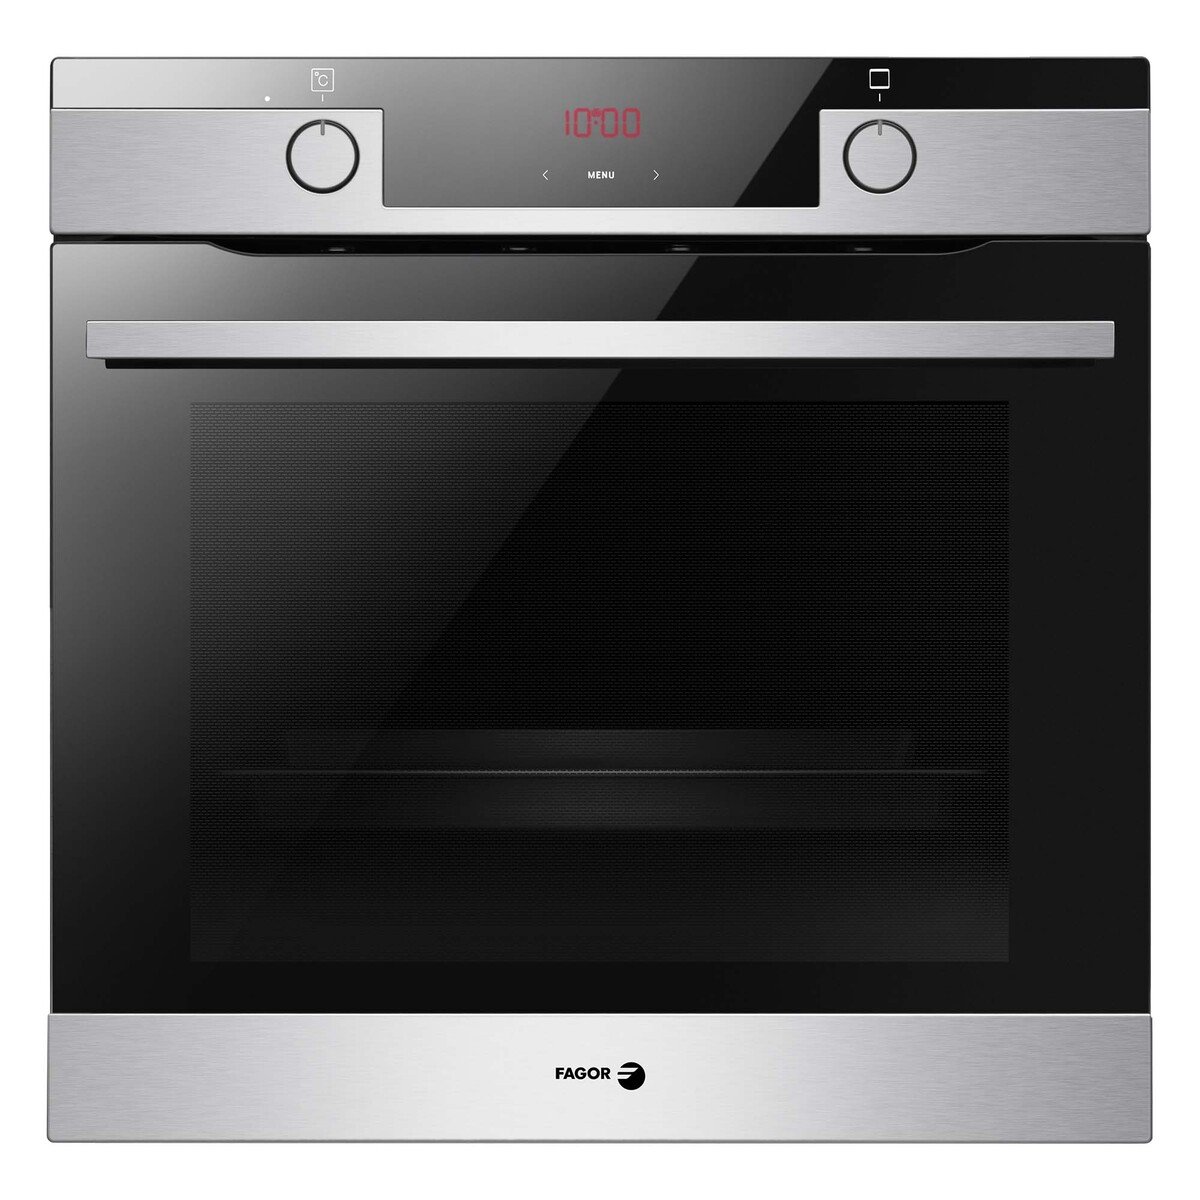 Fagor Built-in Electric Oven OE-450X 77LTR